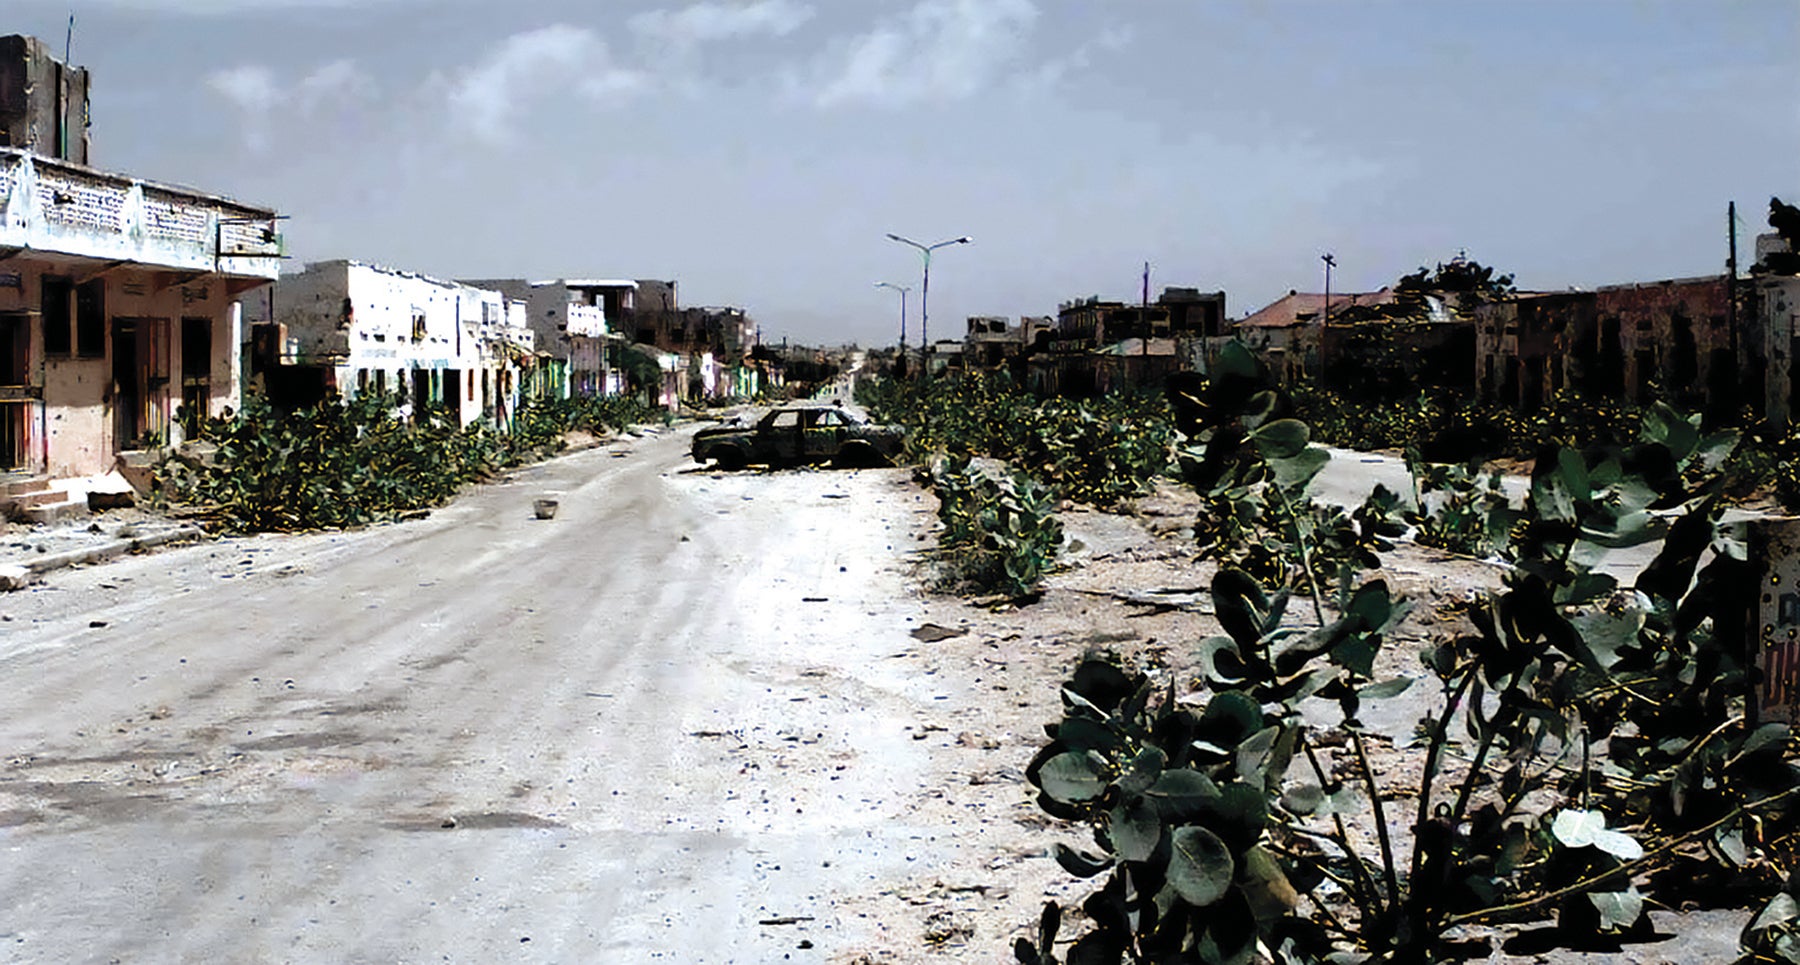 The abandoned street in Mogadishu known as the ‘Green Line’ served as a dividing line between warring Somali clans. (Credit: Wikipedia)